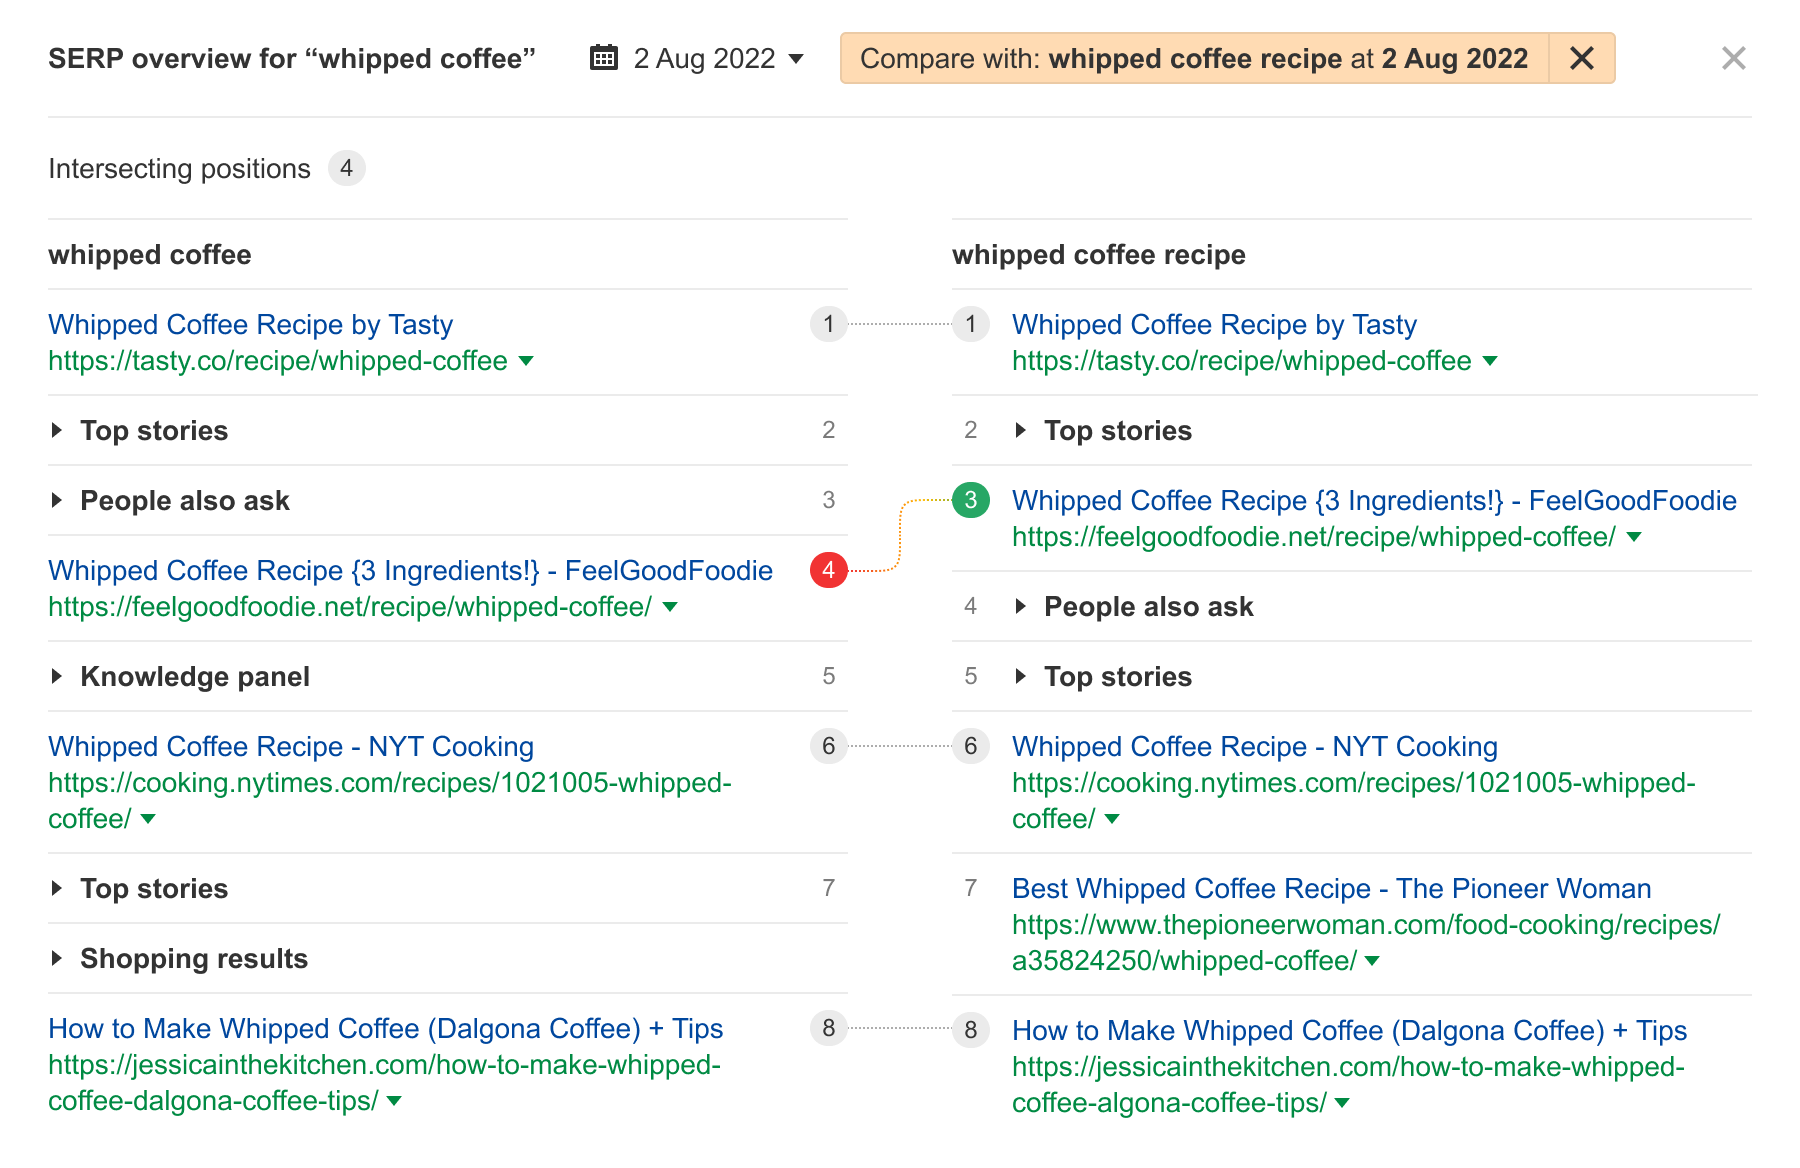 Side-by-side comparison of the SERP overview of "whipped coffee" and "whipped coffee recipe," respectively